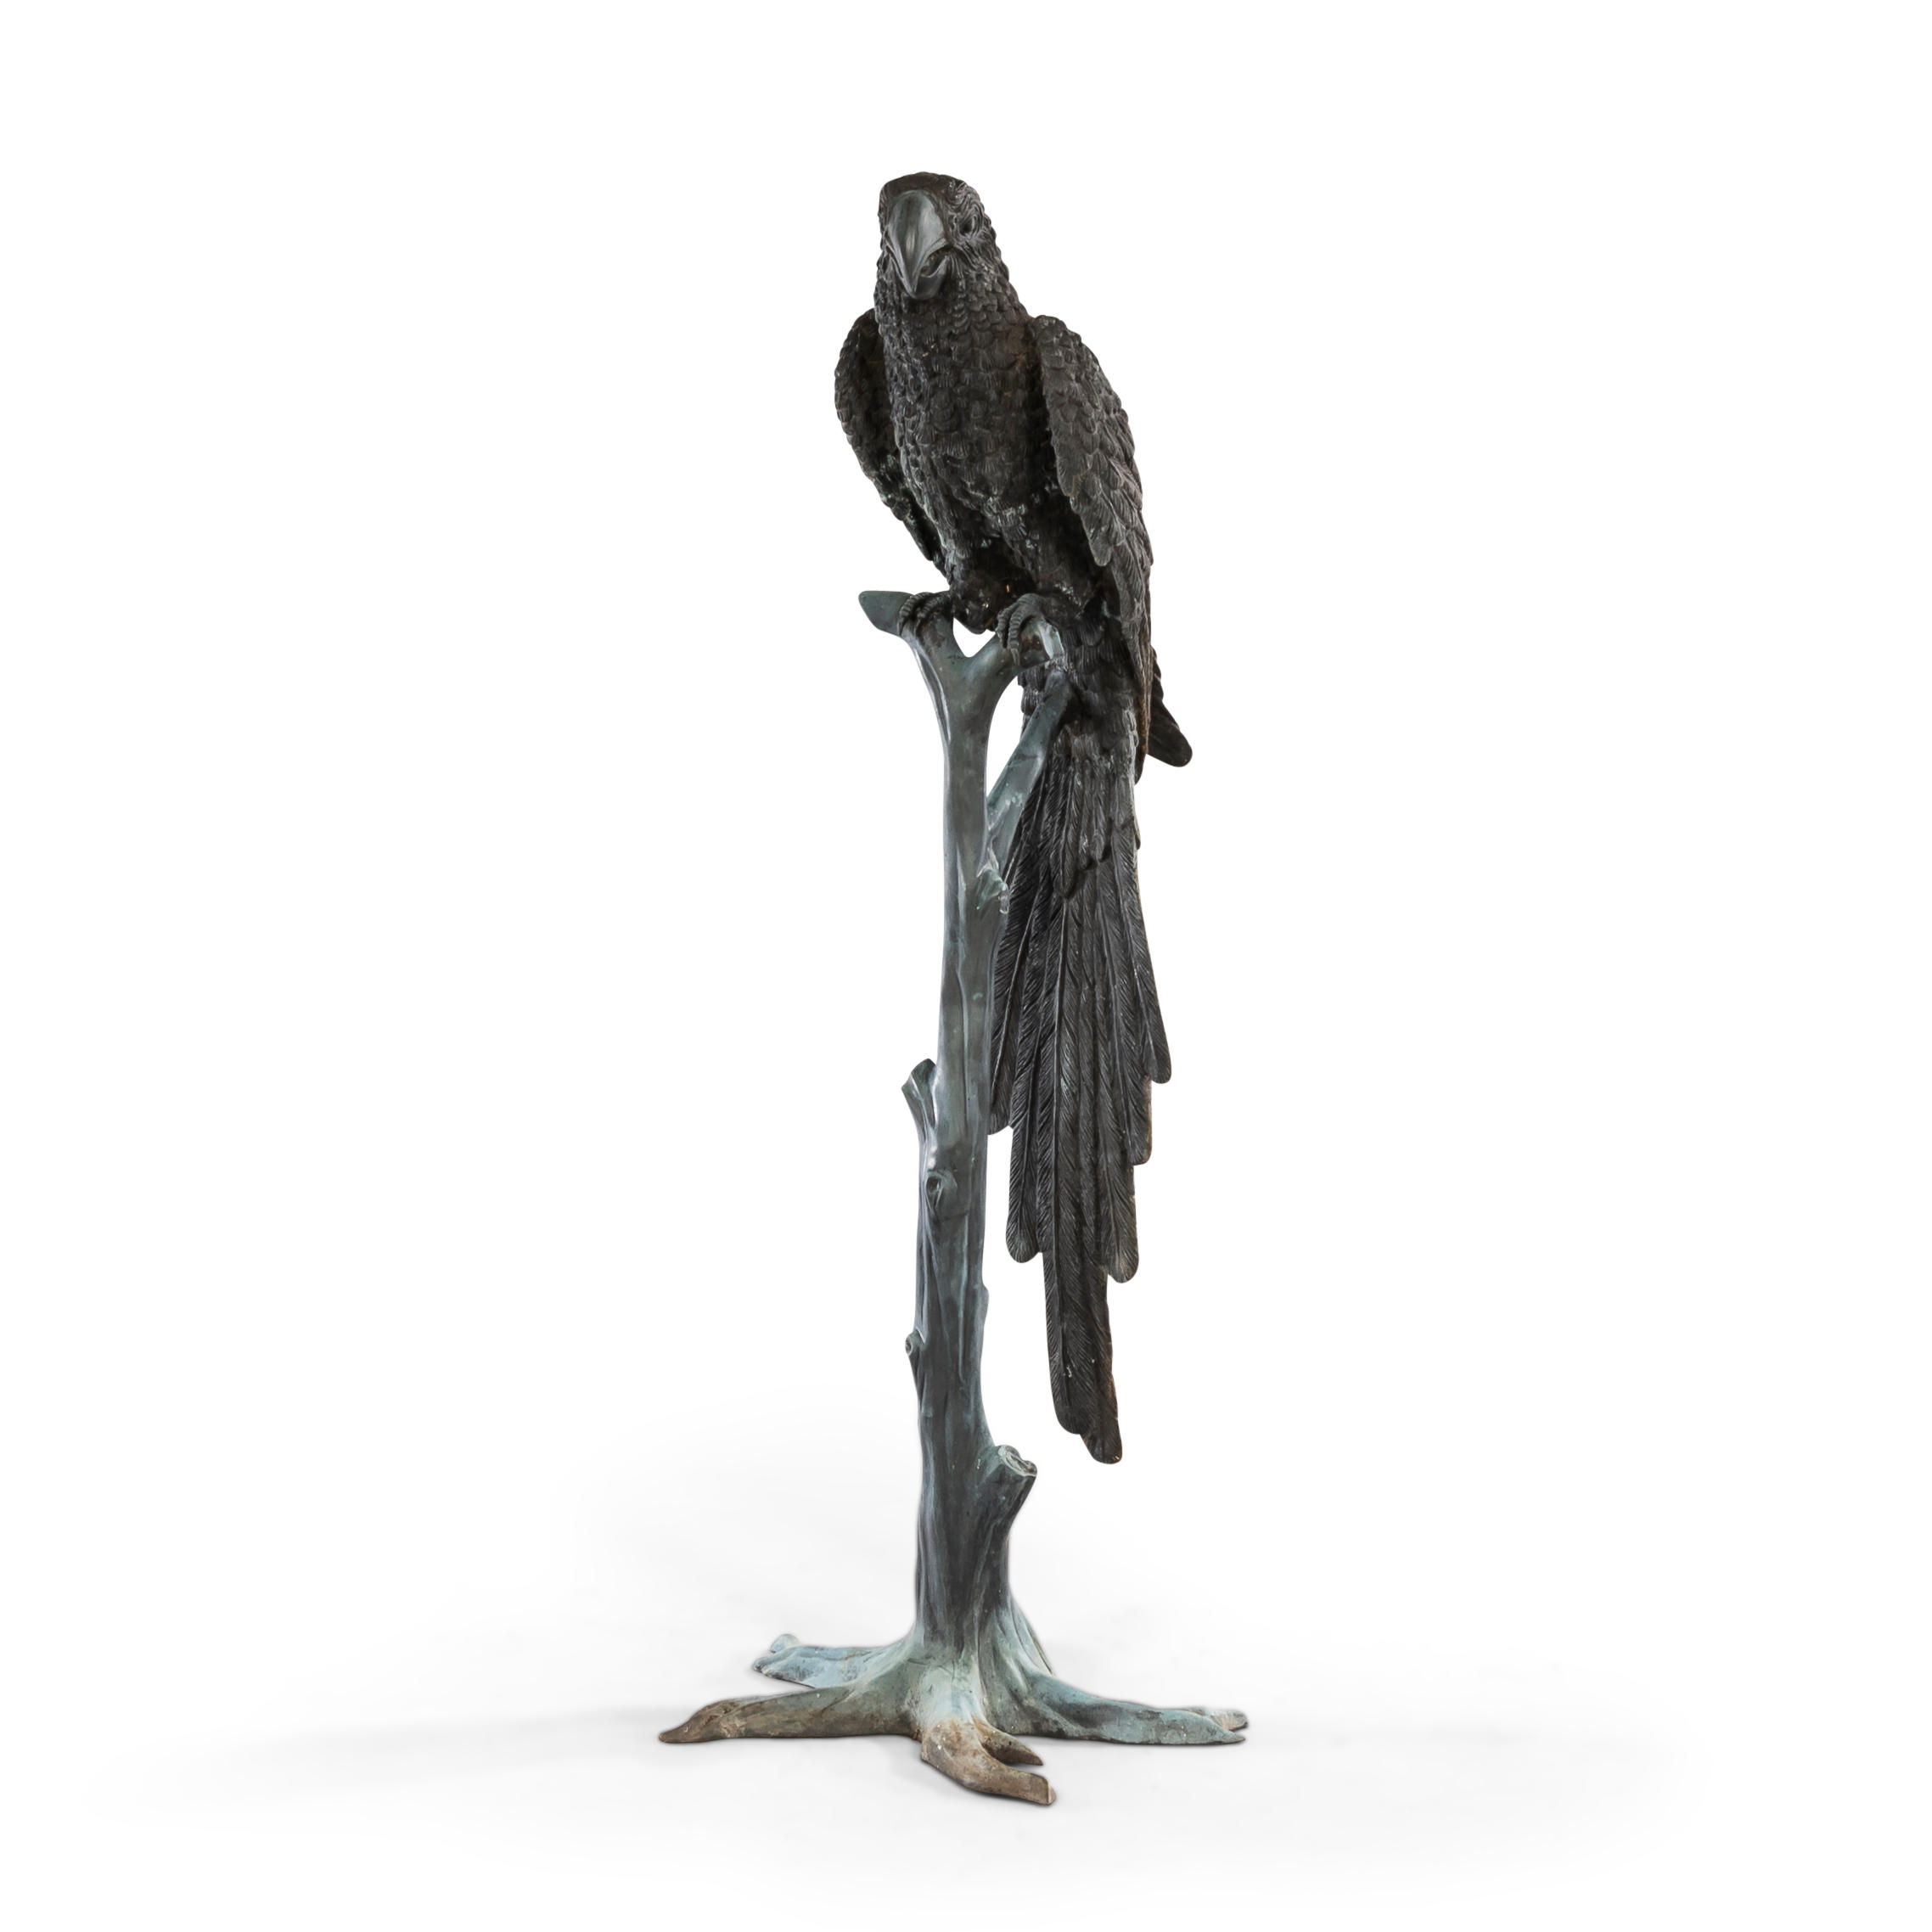 MONUMENTAL BRONZE FIGURE OF A PARROT,